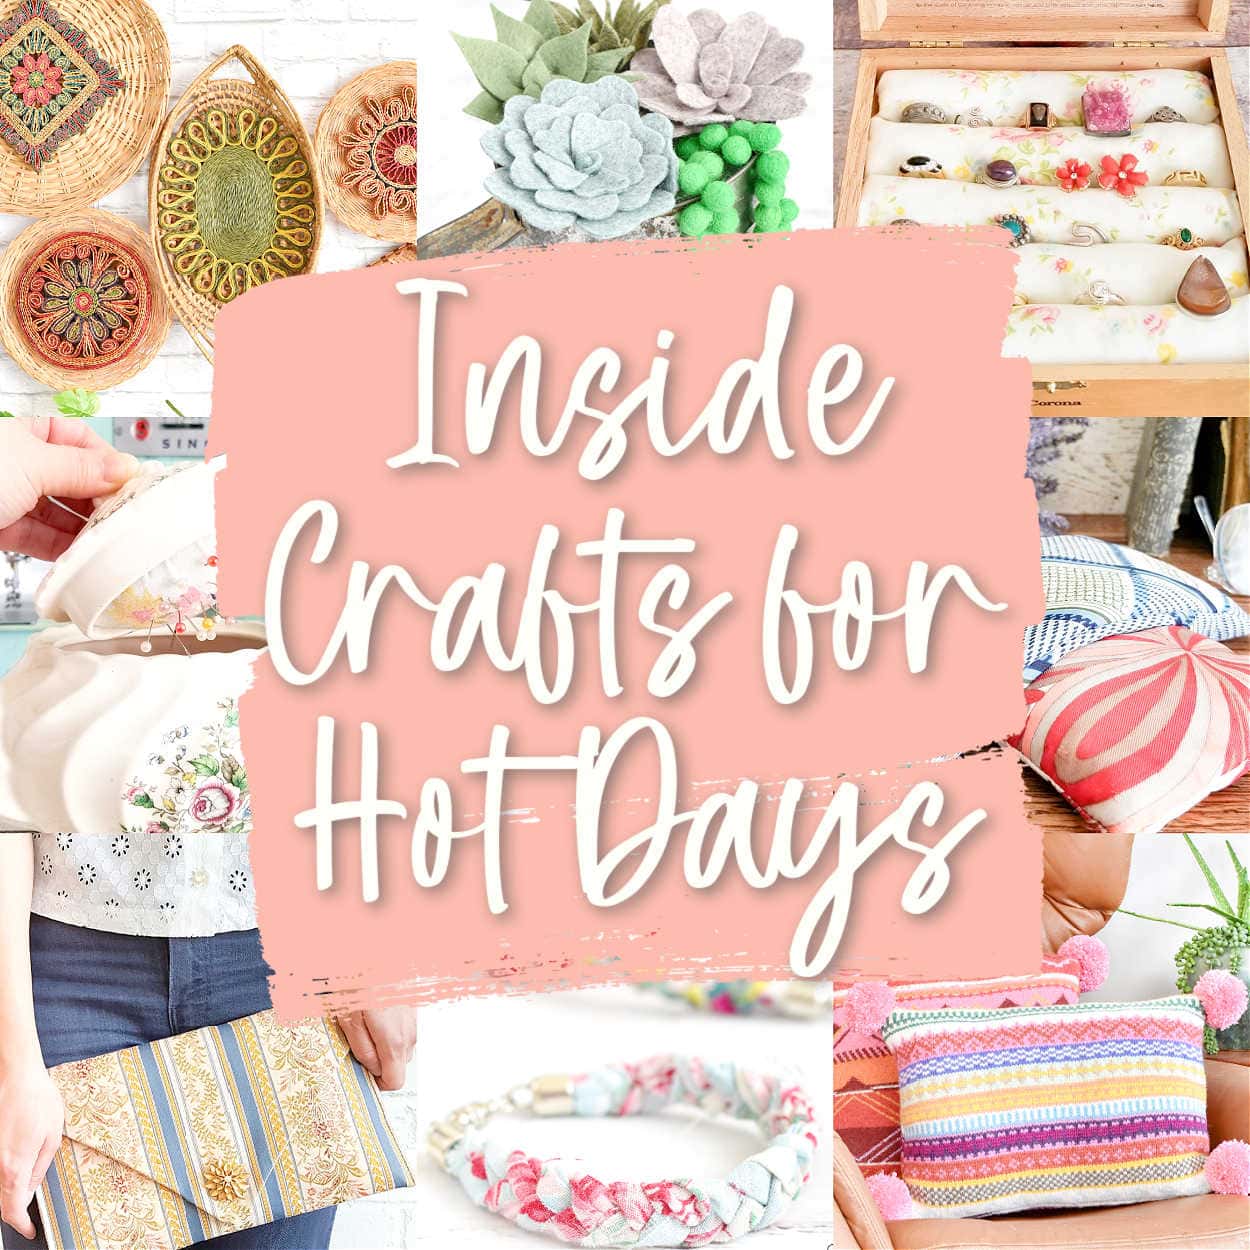 Crafts to Make When It’s Hot Outside